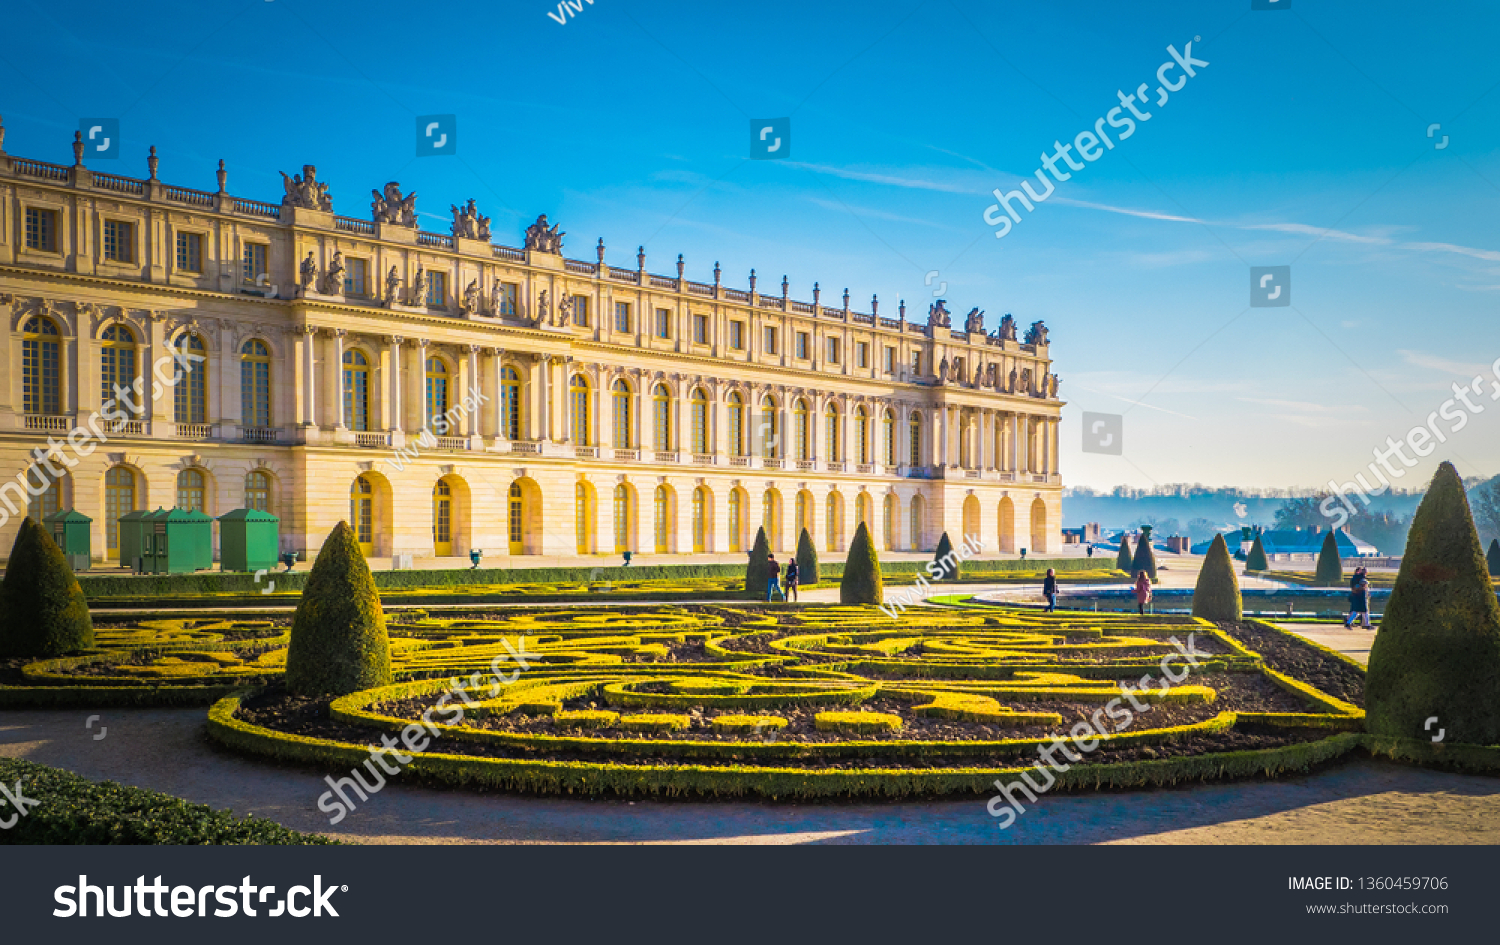 Famous palace Versailles with beautiful gardens outdoors near Paris, France. The Palace Versailles was a royal chateau and was added to the UNESCO list of World Heritage Sites.  #1360459706